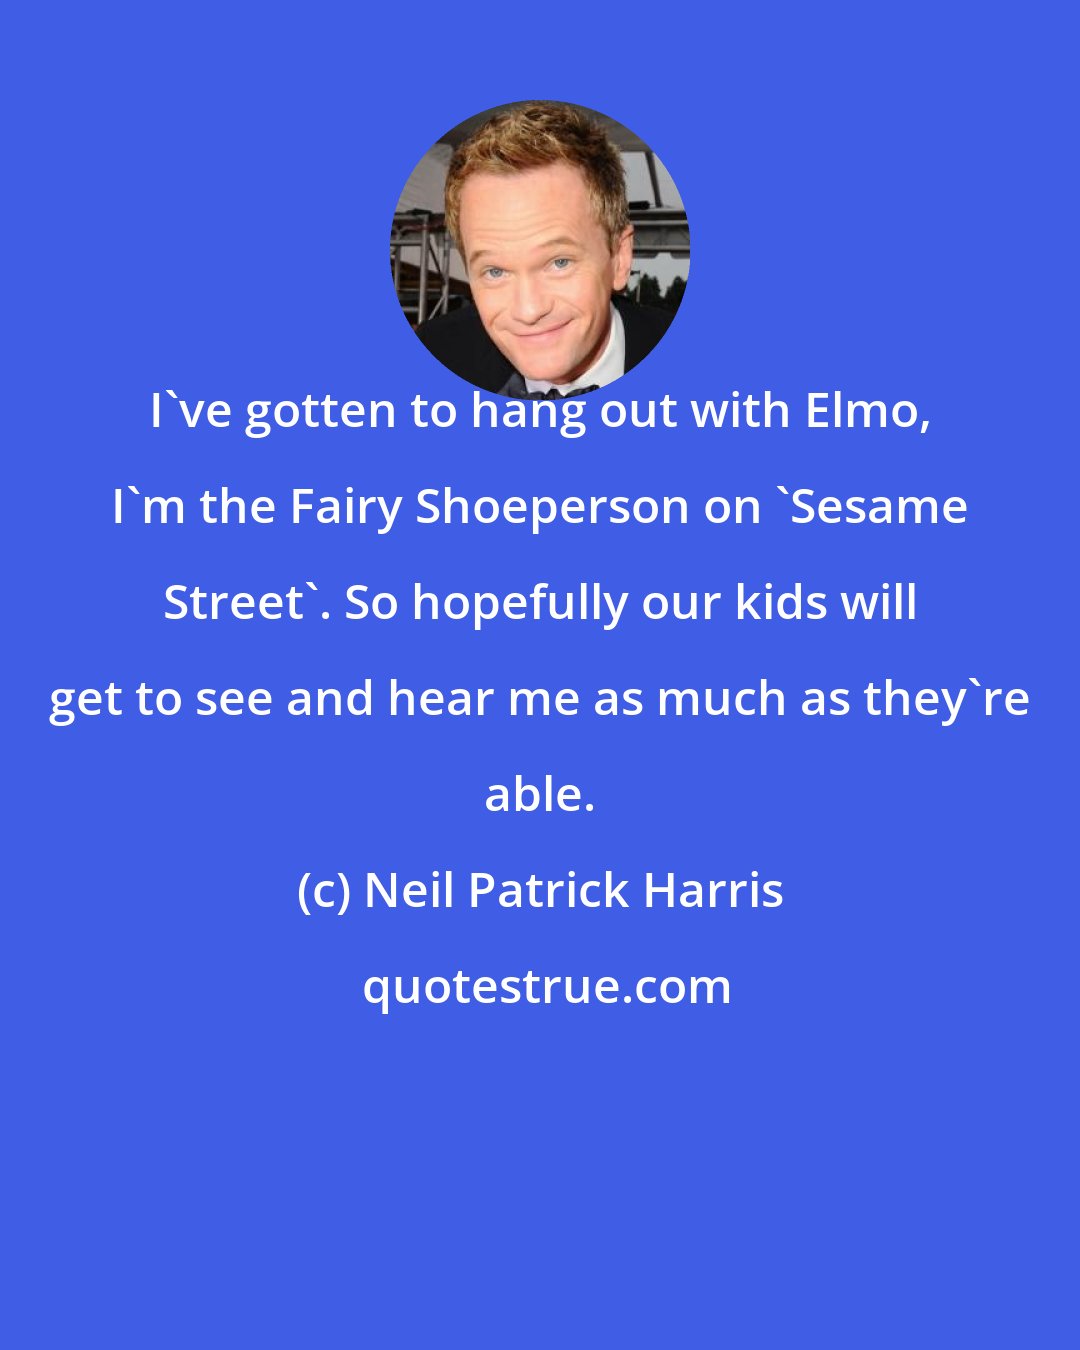 Neil Patrick Harris: I've gotten to hang out with Elmo, I'm the Fairy Shoeperson on 'Sesame Street'. So hopefully our kids will get to see and hear me as much as they're able.